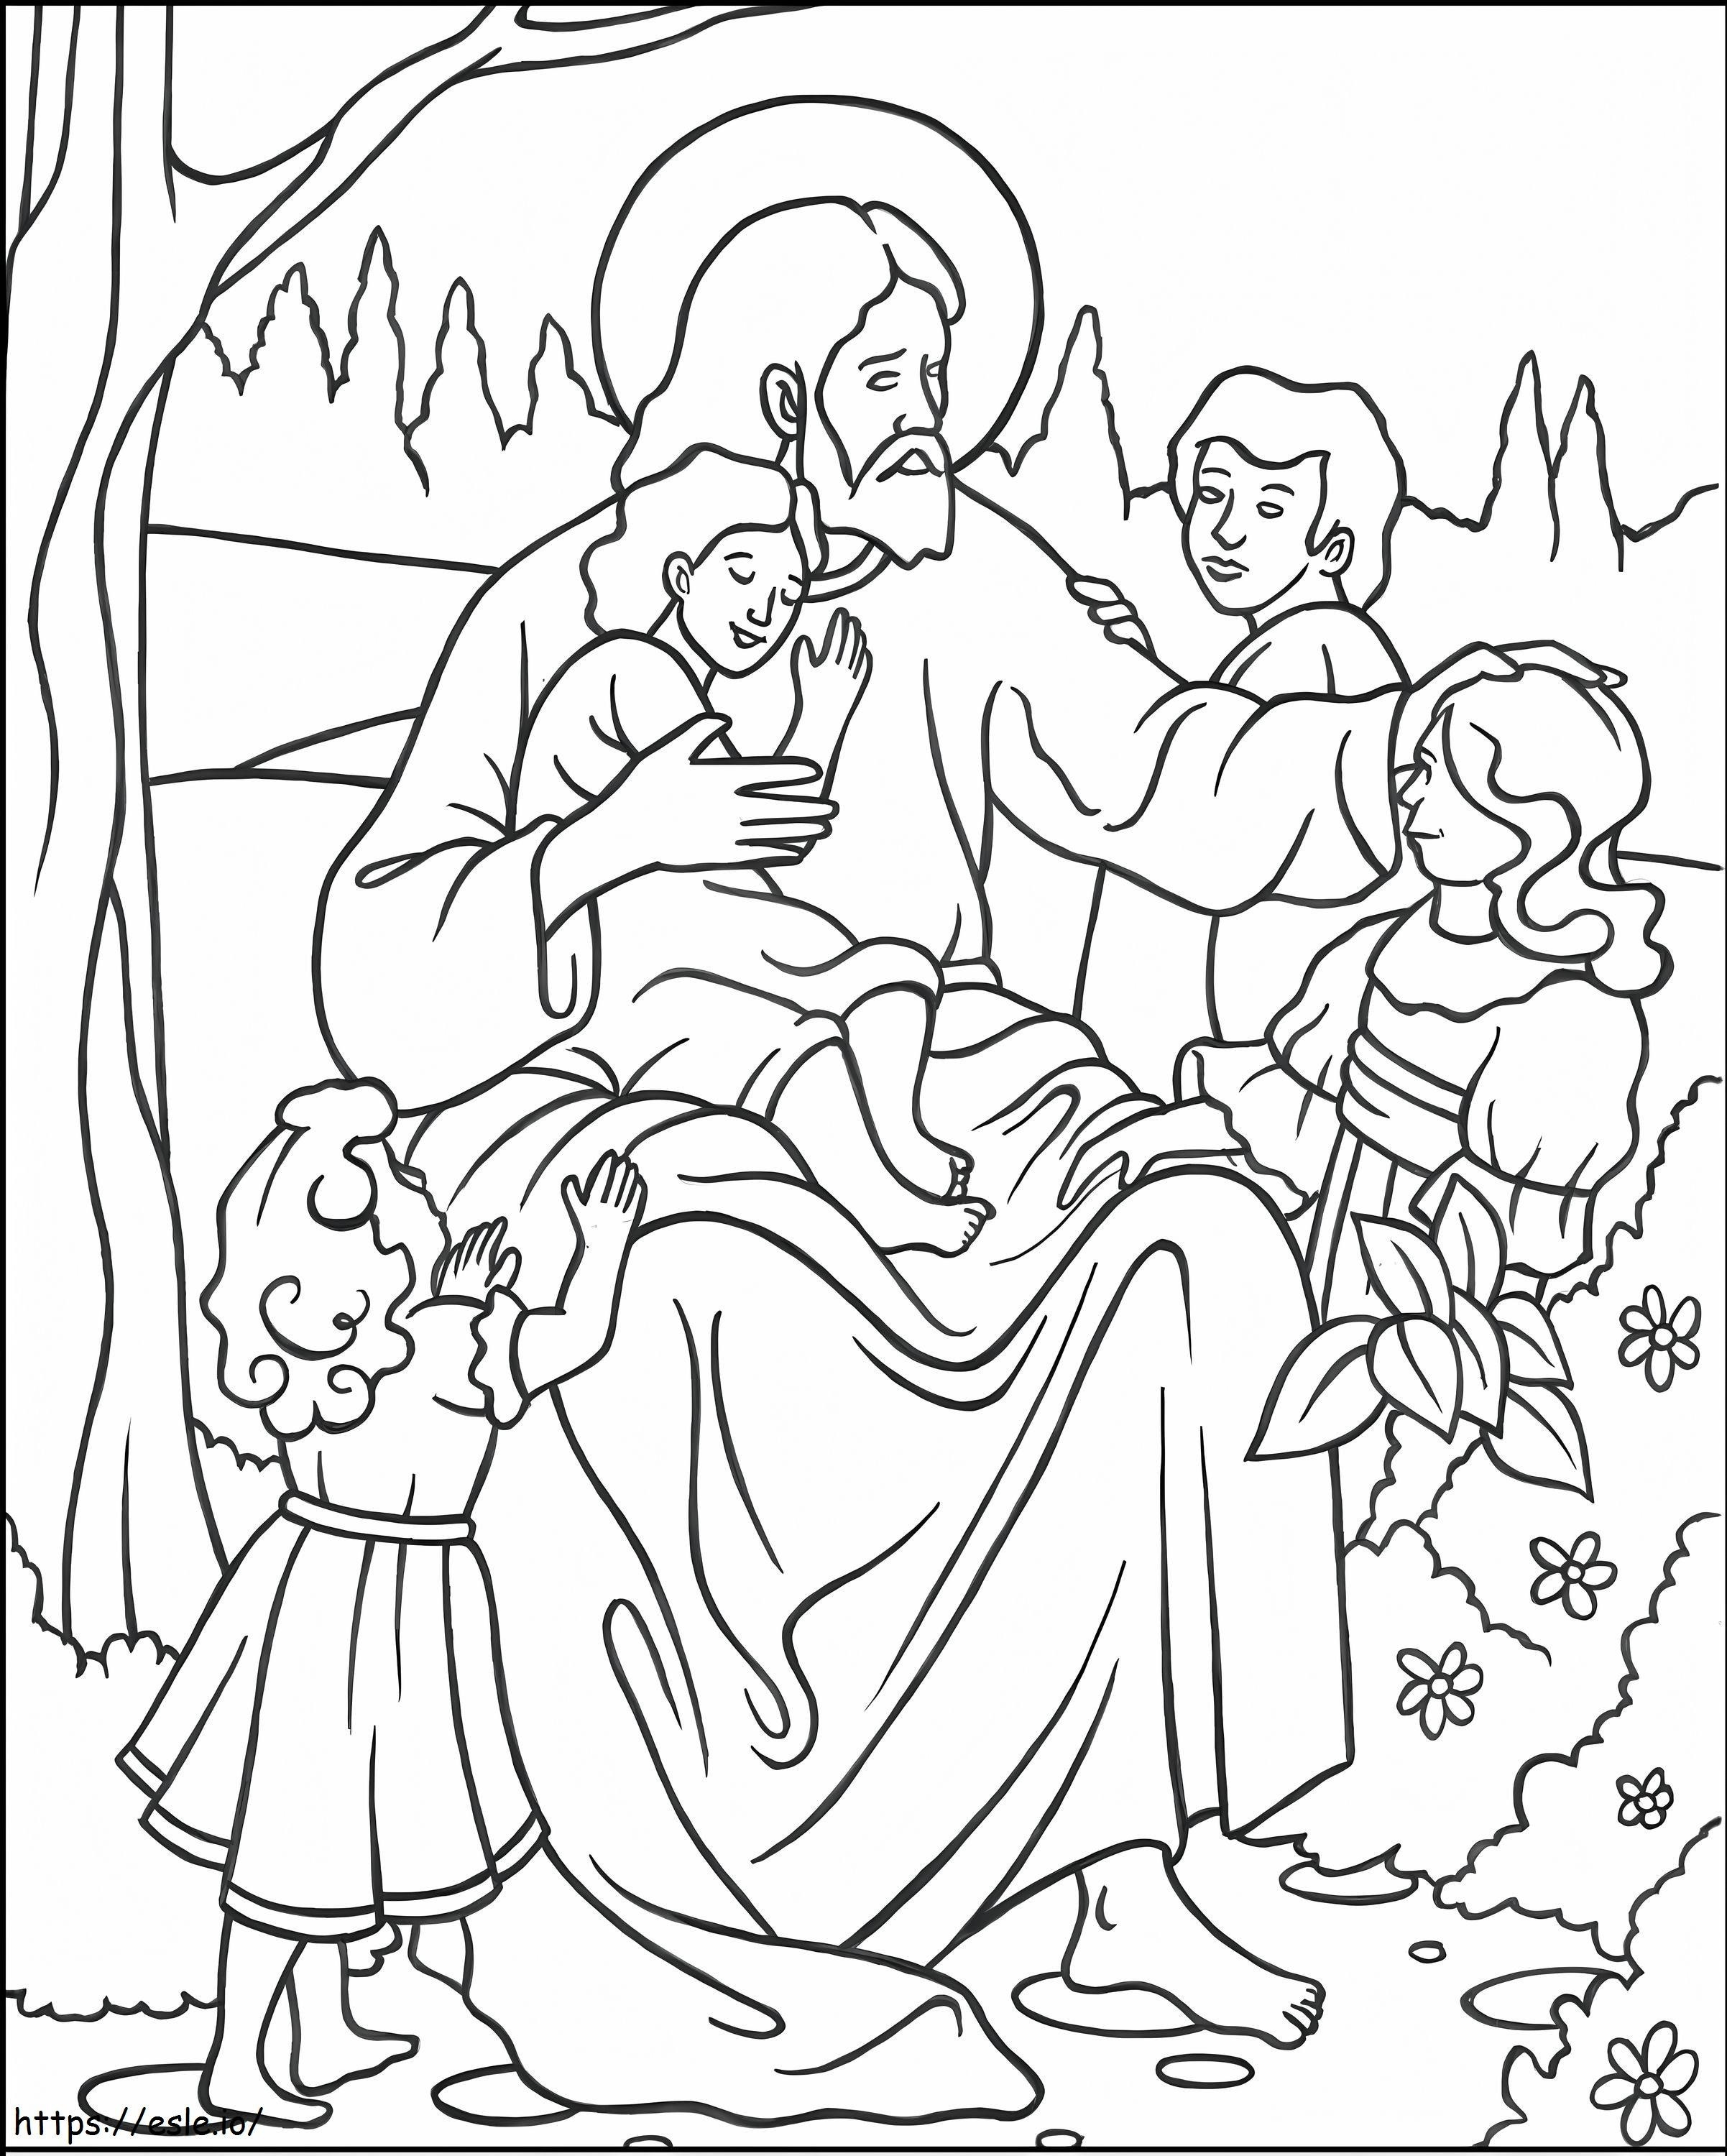 Jesus And Leave The Little Children coloring page